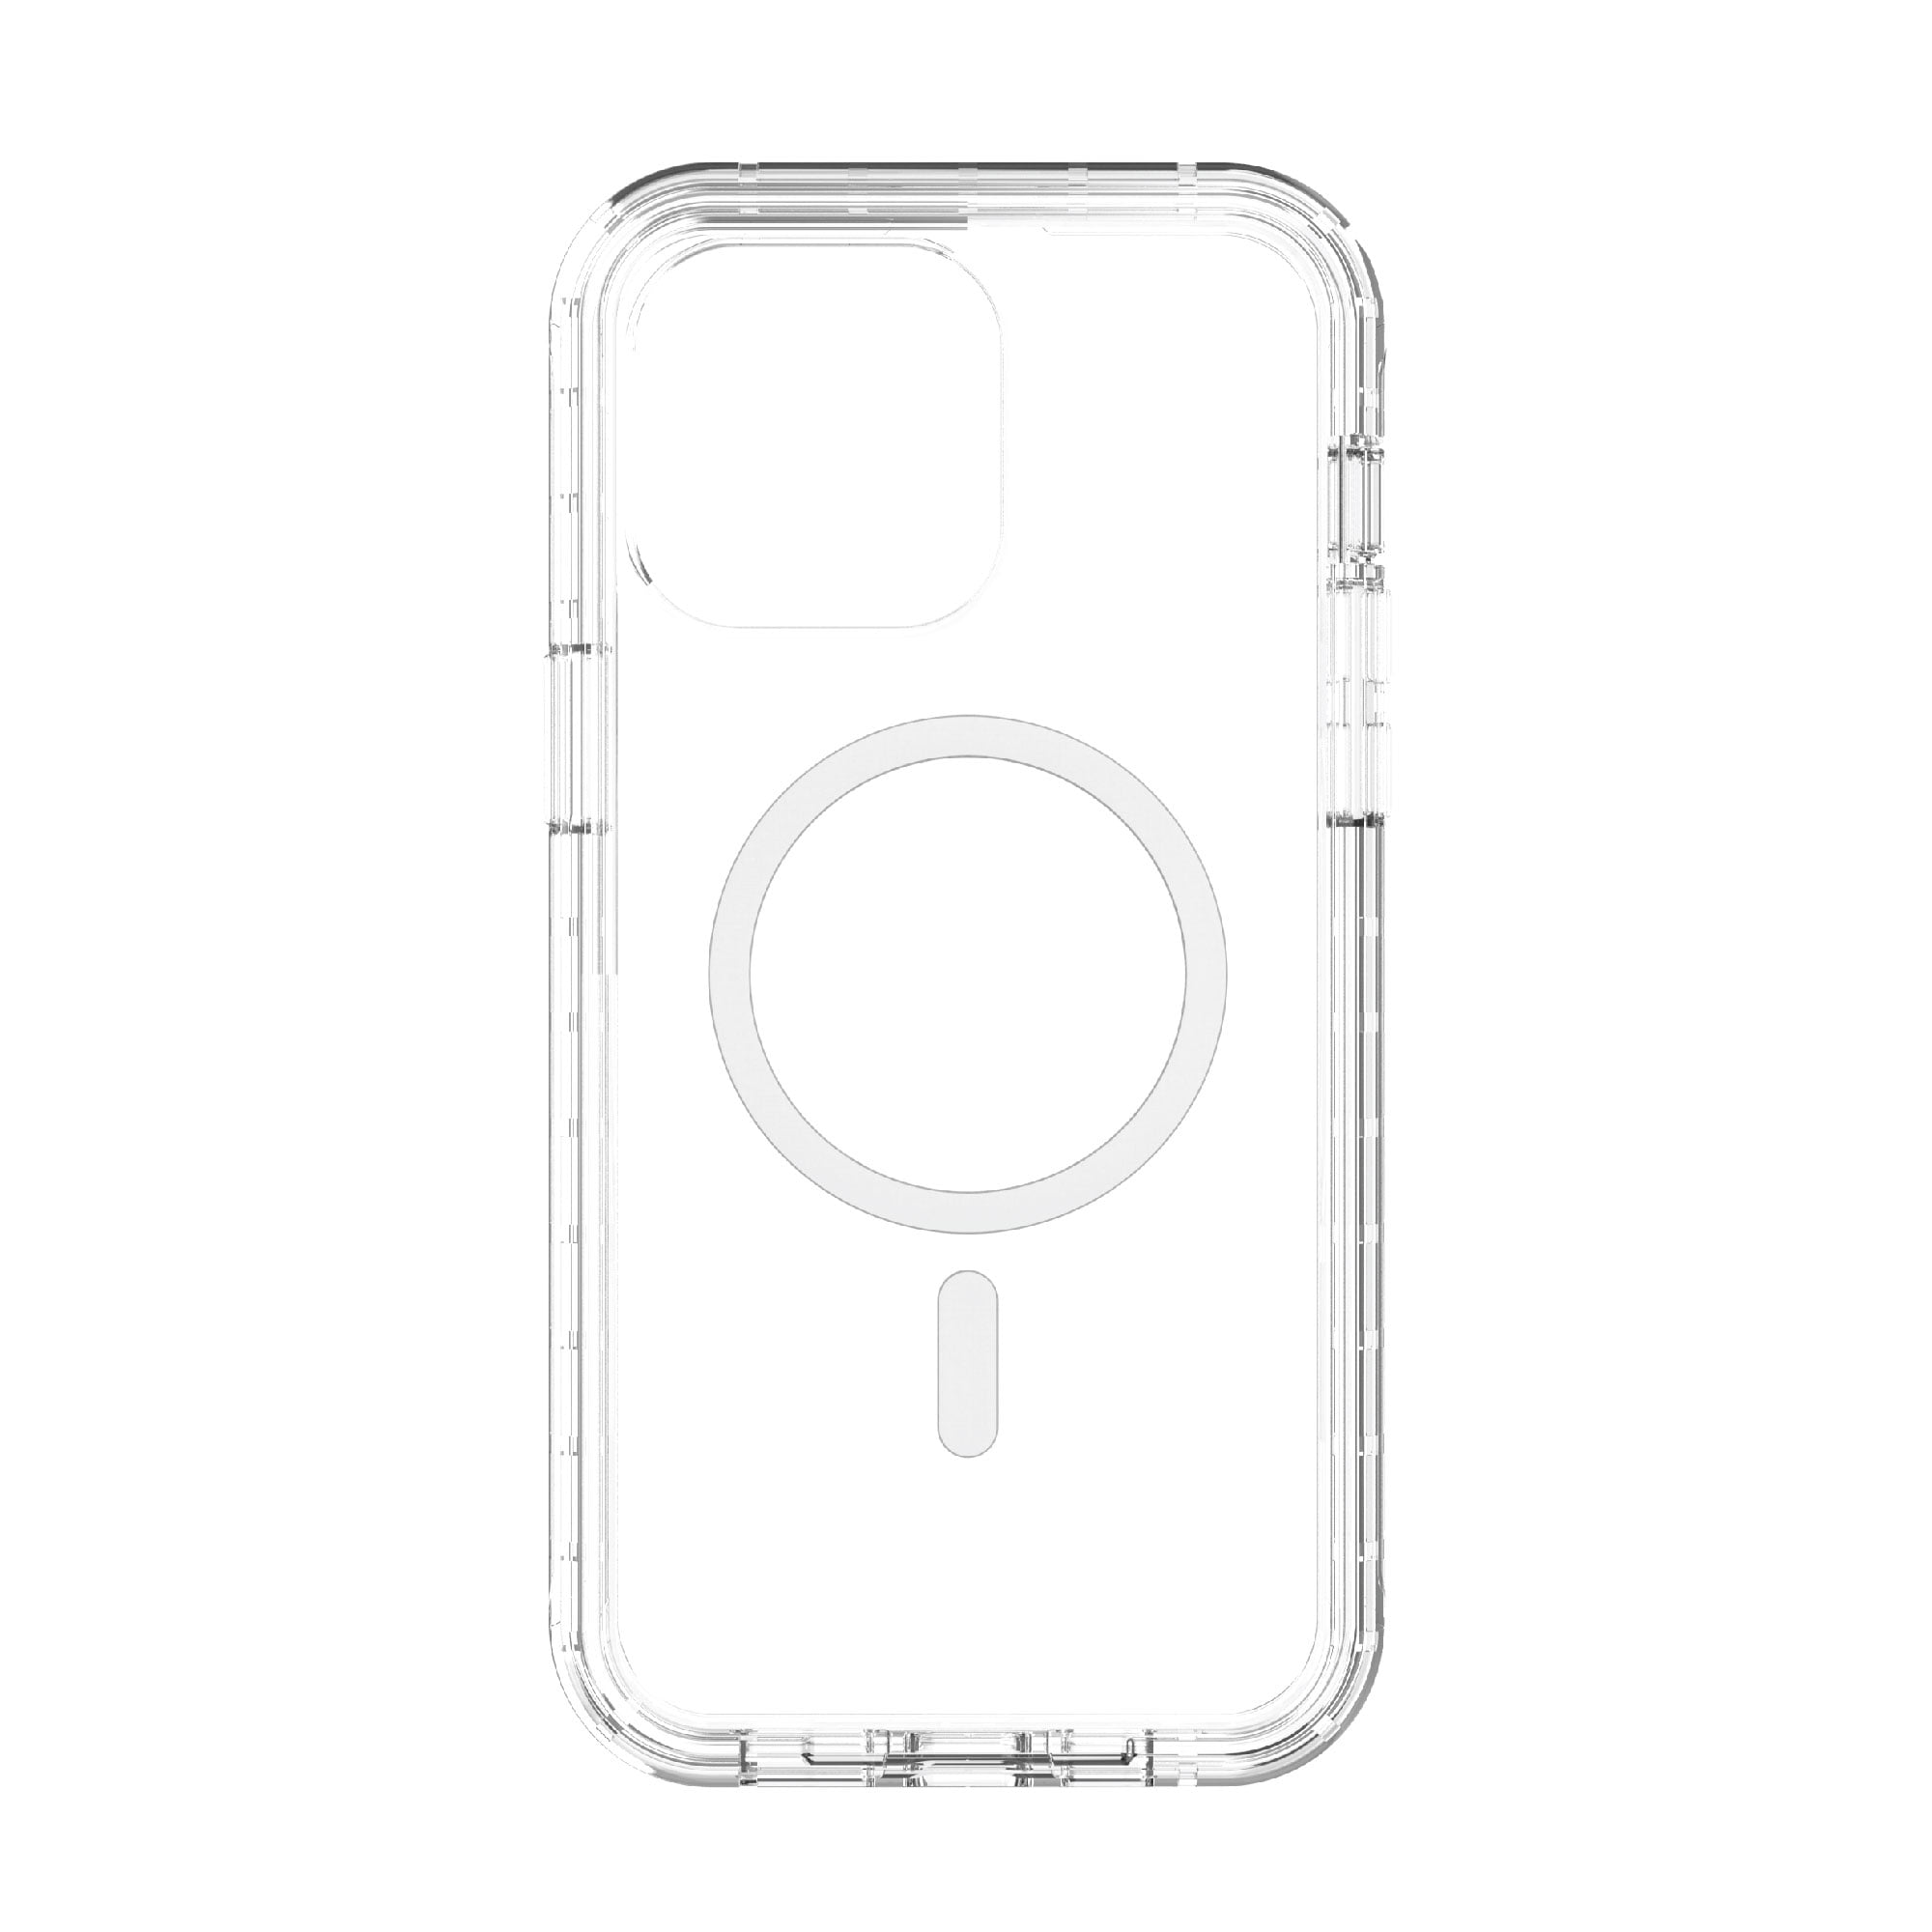 onn. MagSafe Compatible Rugged Phone Case for iPhone 13 - Clear